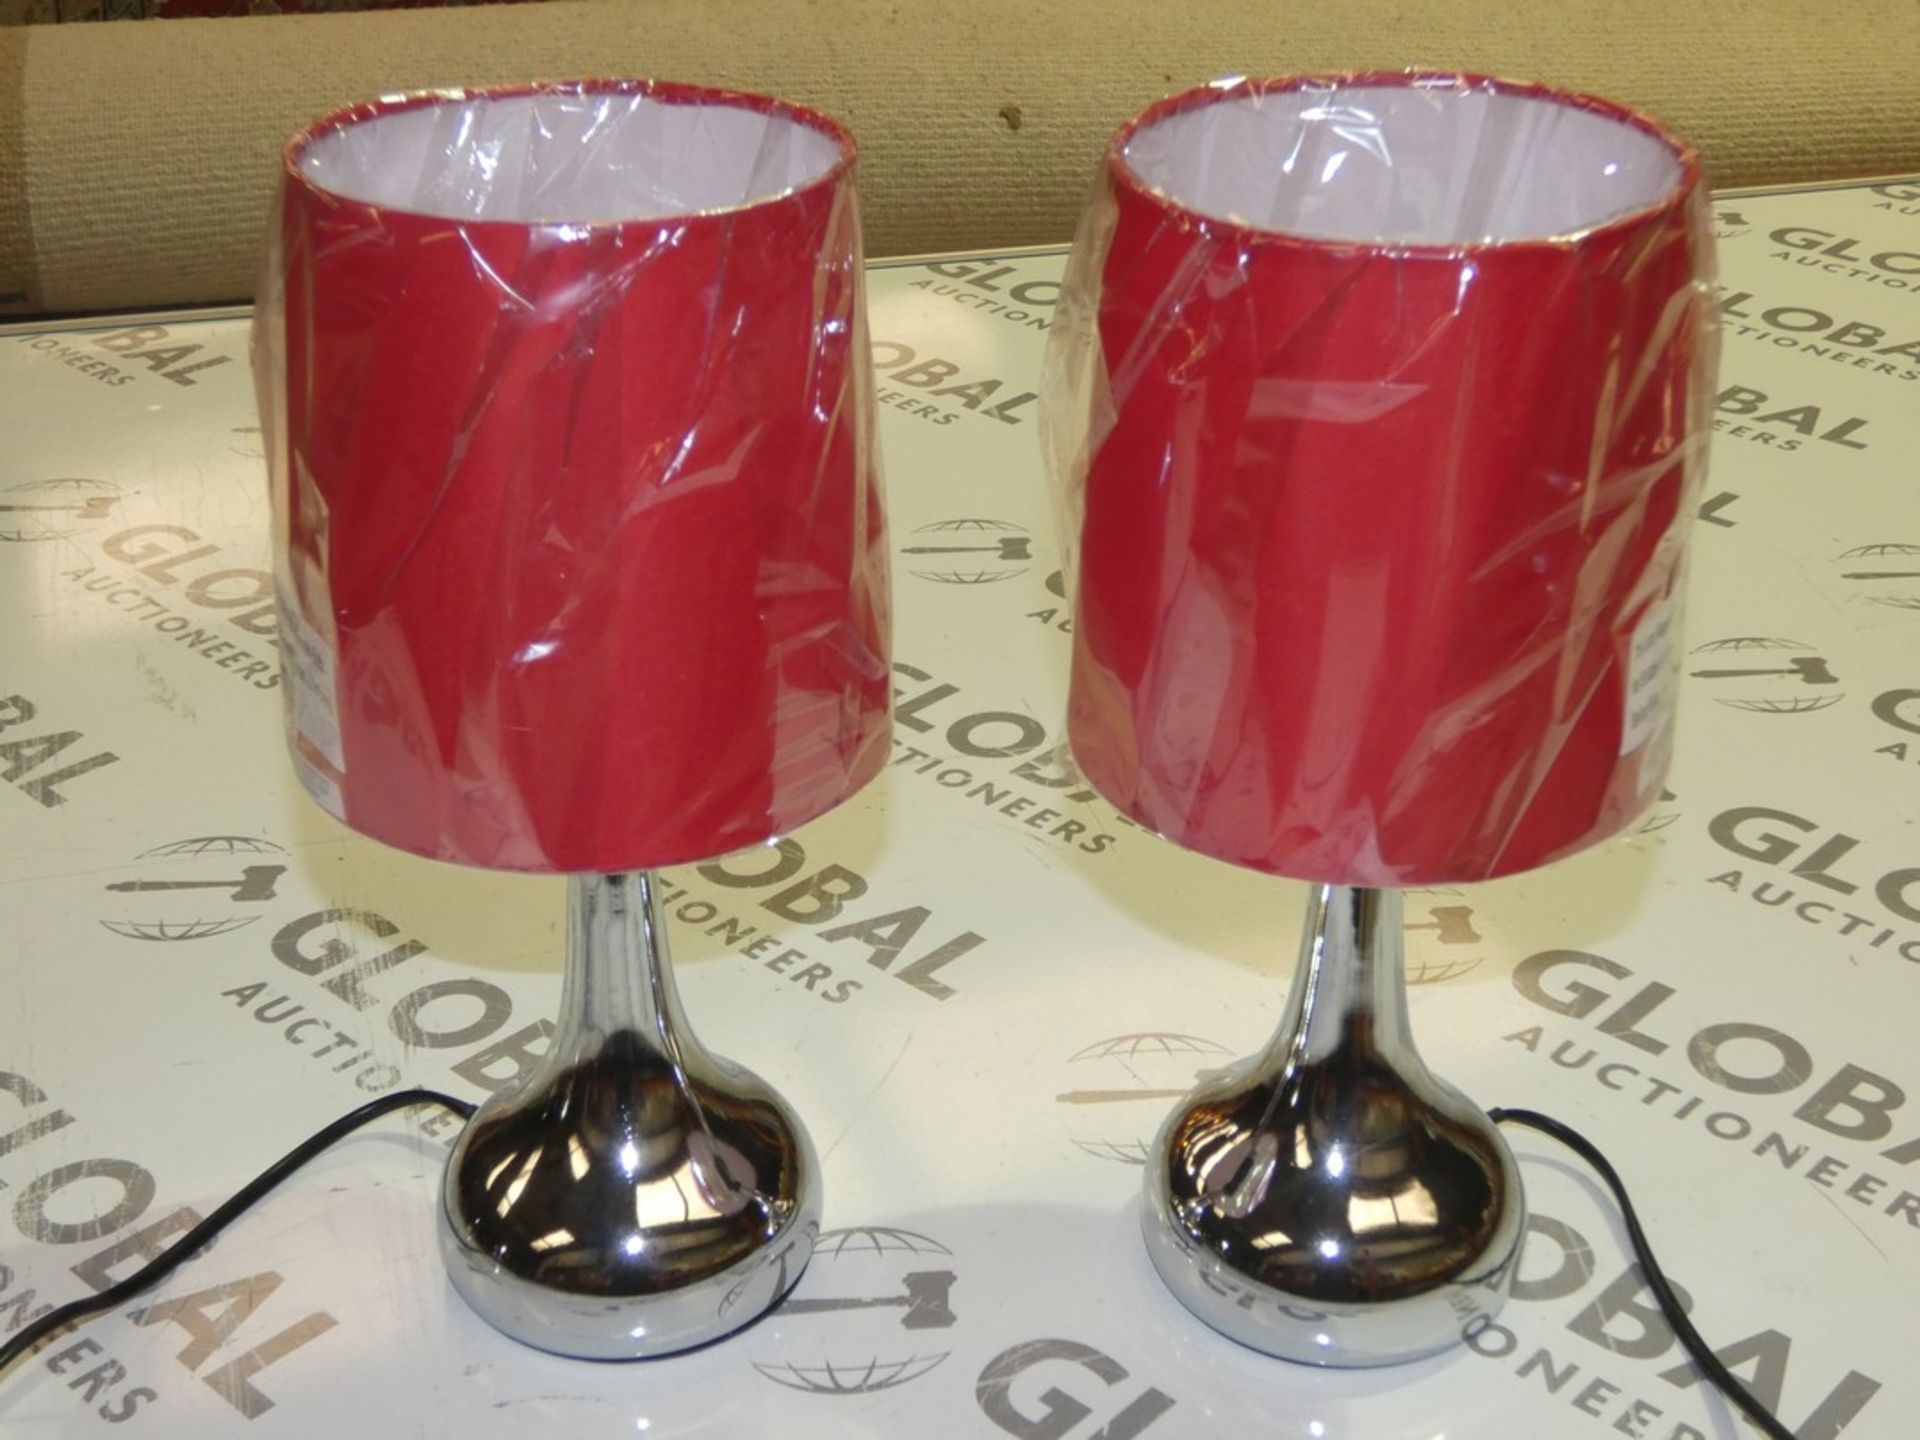 Boxed Pair of Minisun Stainless Steel and Red Fabric Table Lamps RRP £20 Each (14252) (Public